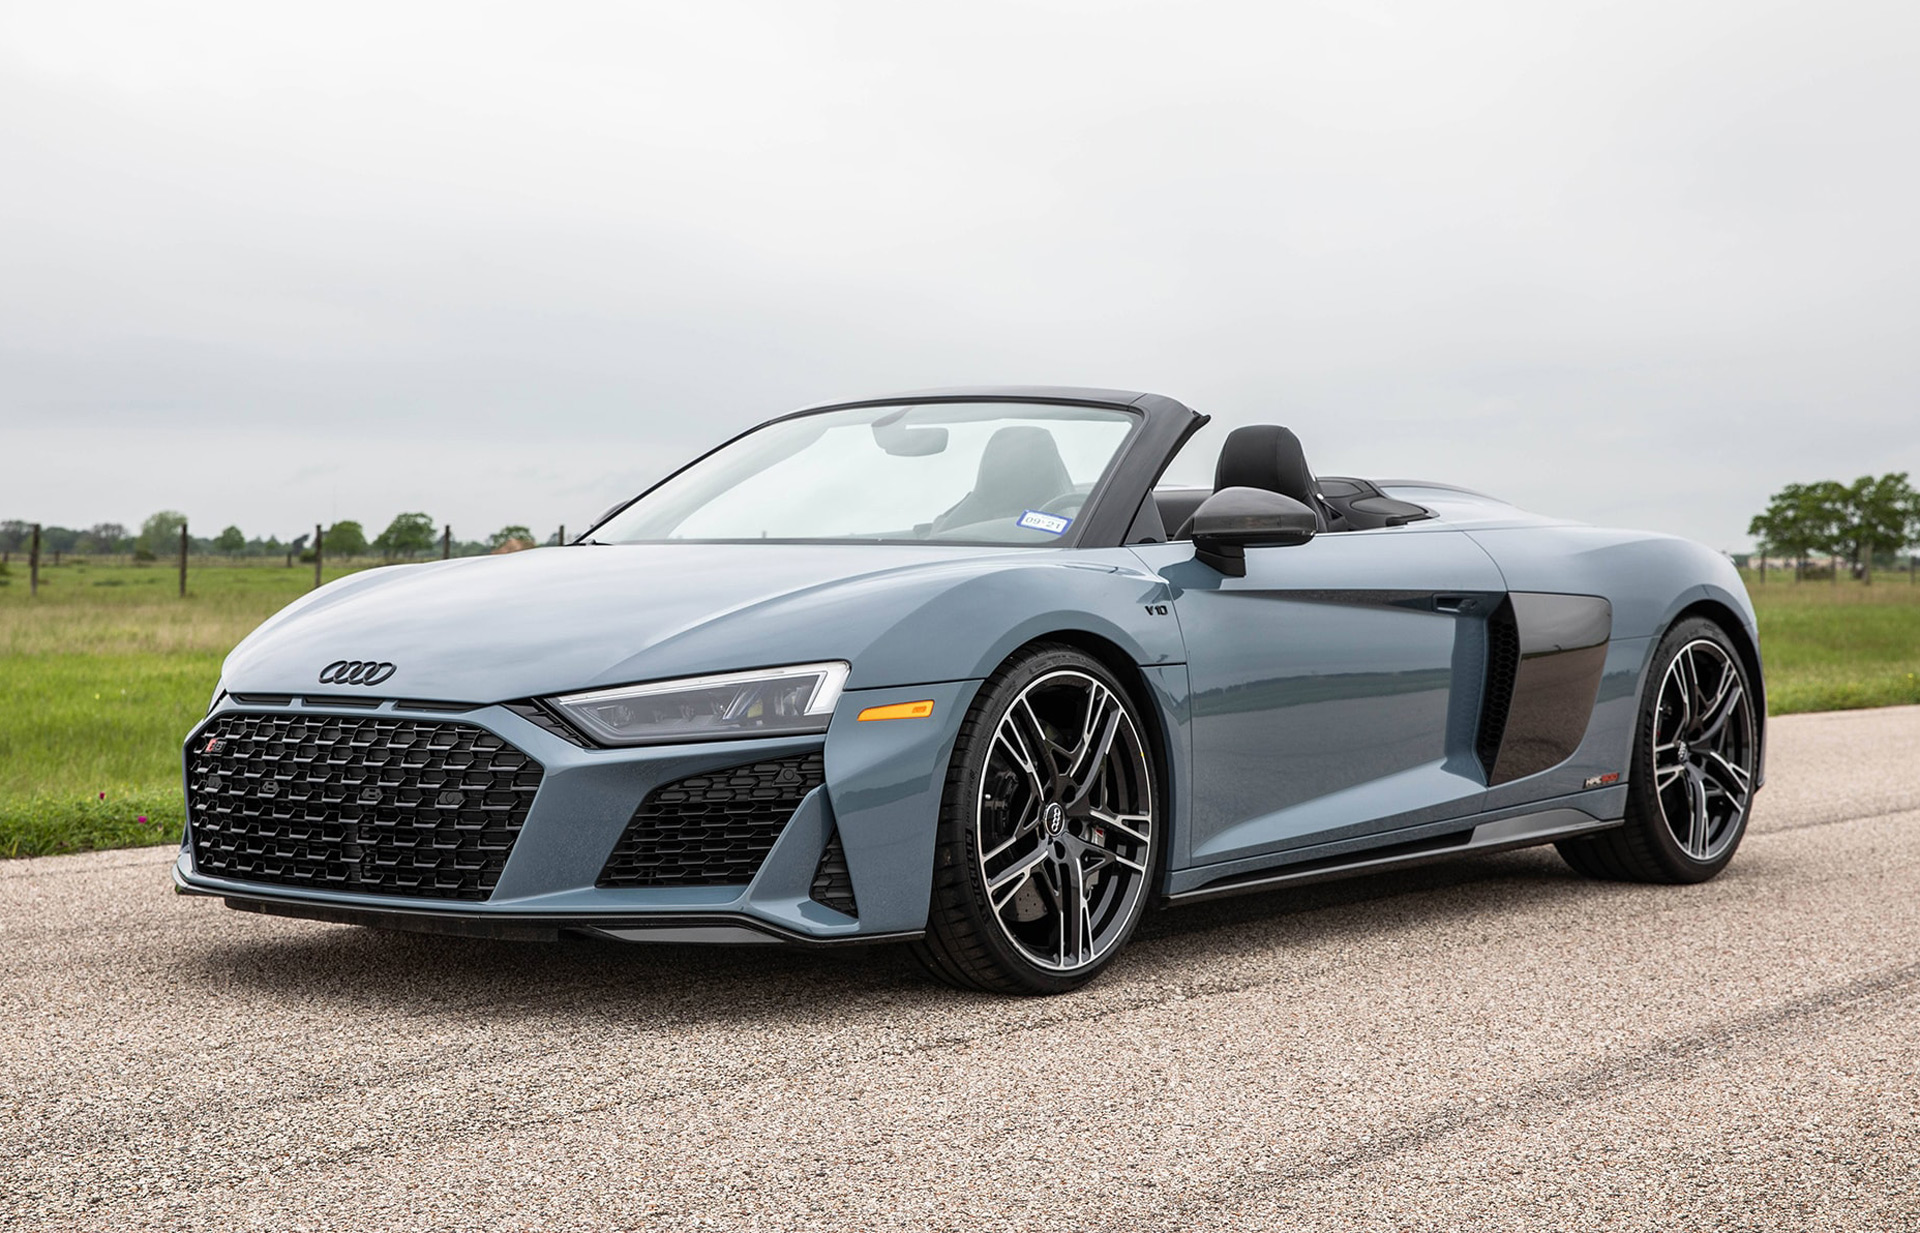 Hennessey dials the Audi R8 up to 912 horsepower